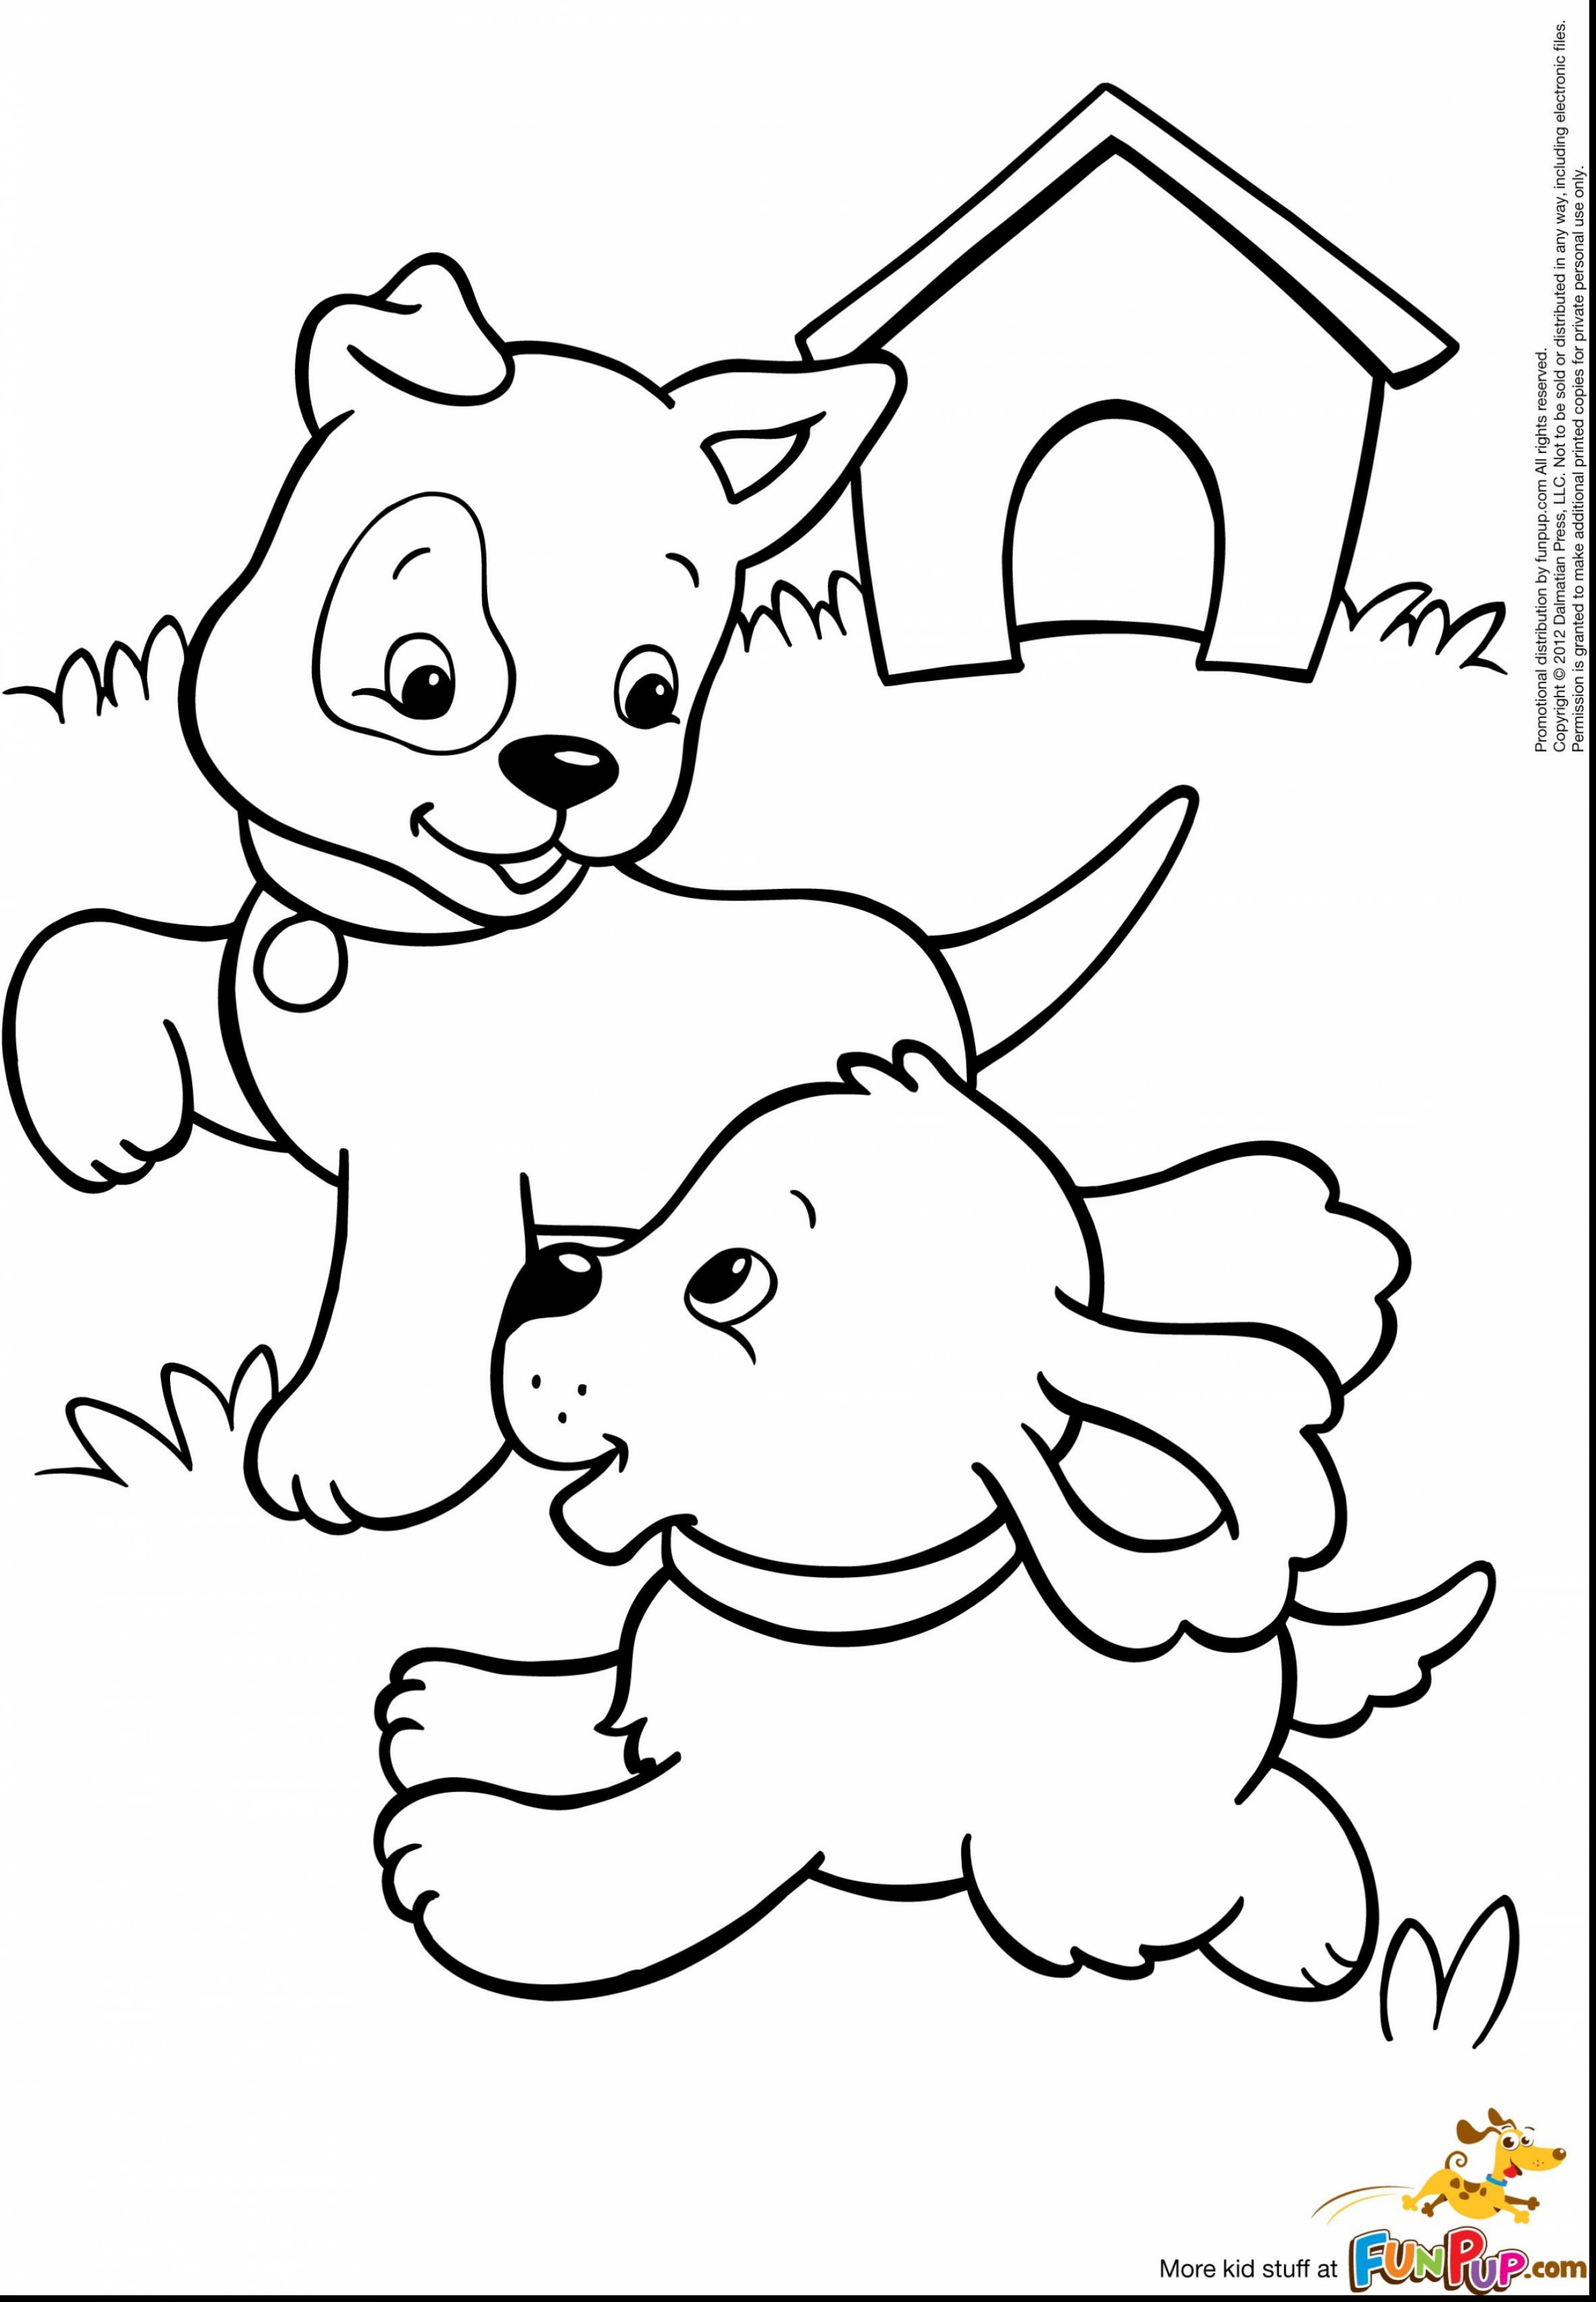 Awesome Puppies Coloring Pages 18 About Remodel Coloring Pages for Adults with Puppies Coloring Pages